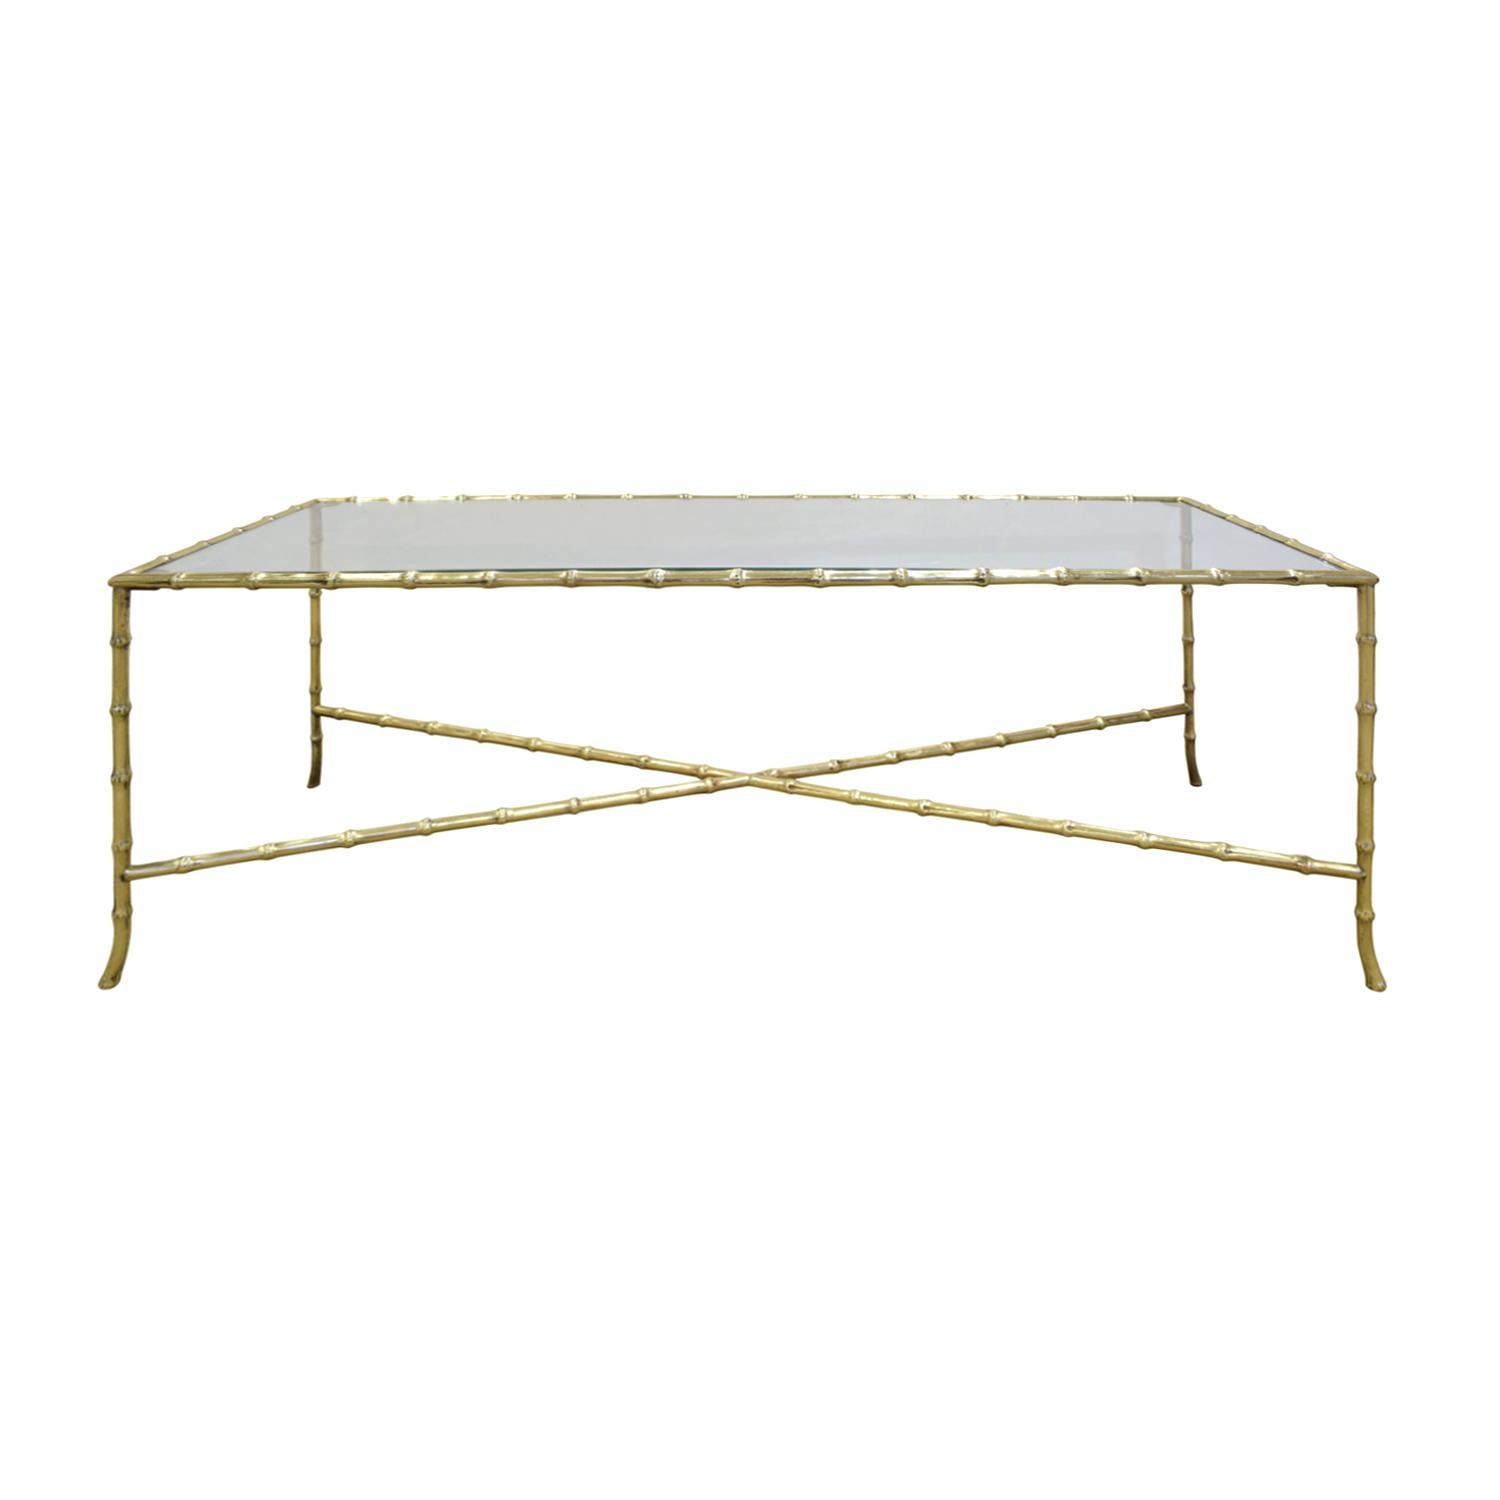 Elegant coffee table in brass with bamboo motif with cross stretchers and inset glass, American 1950s.